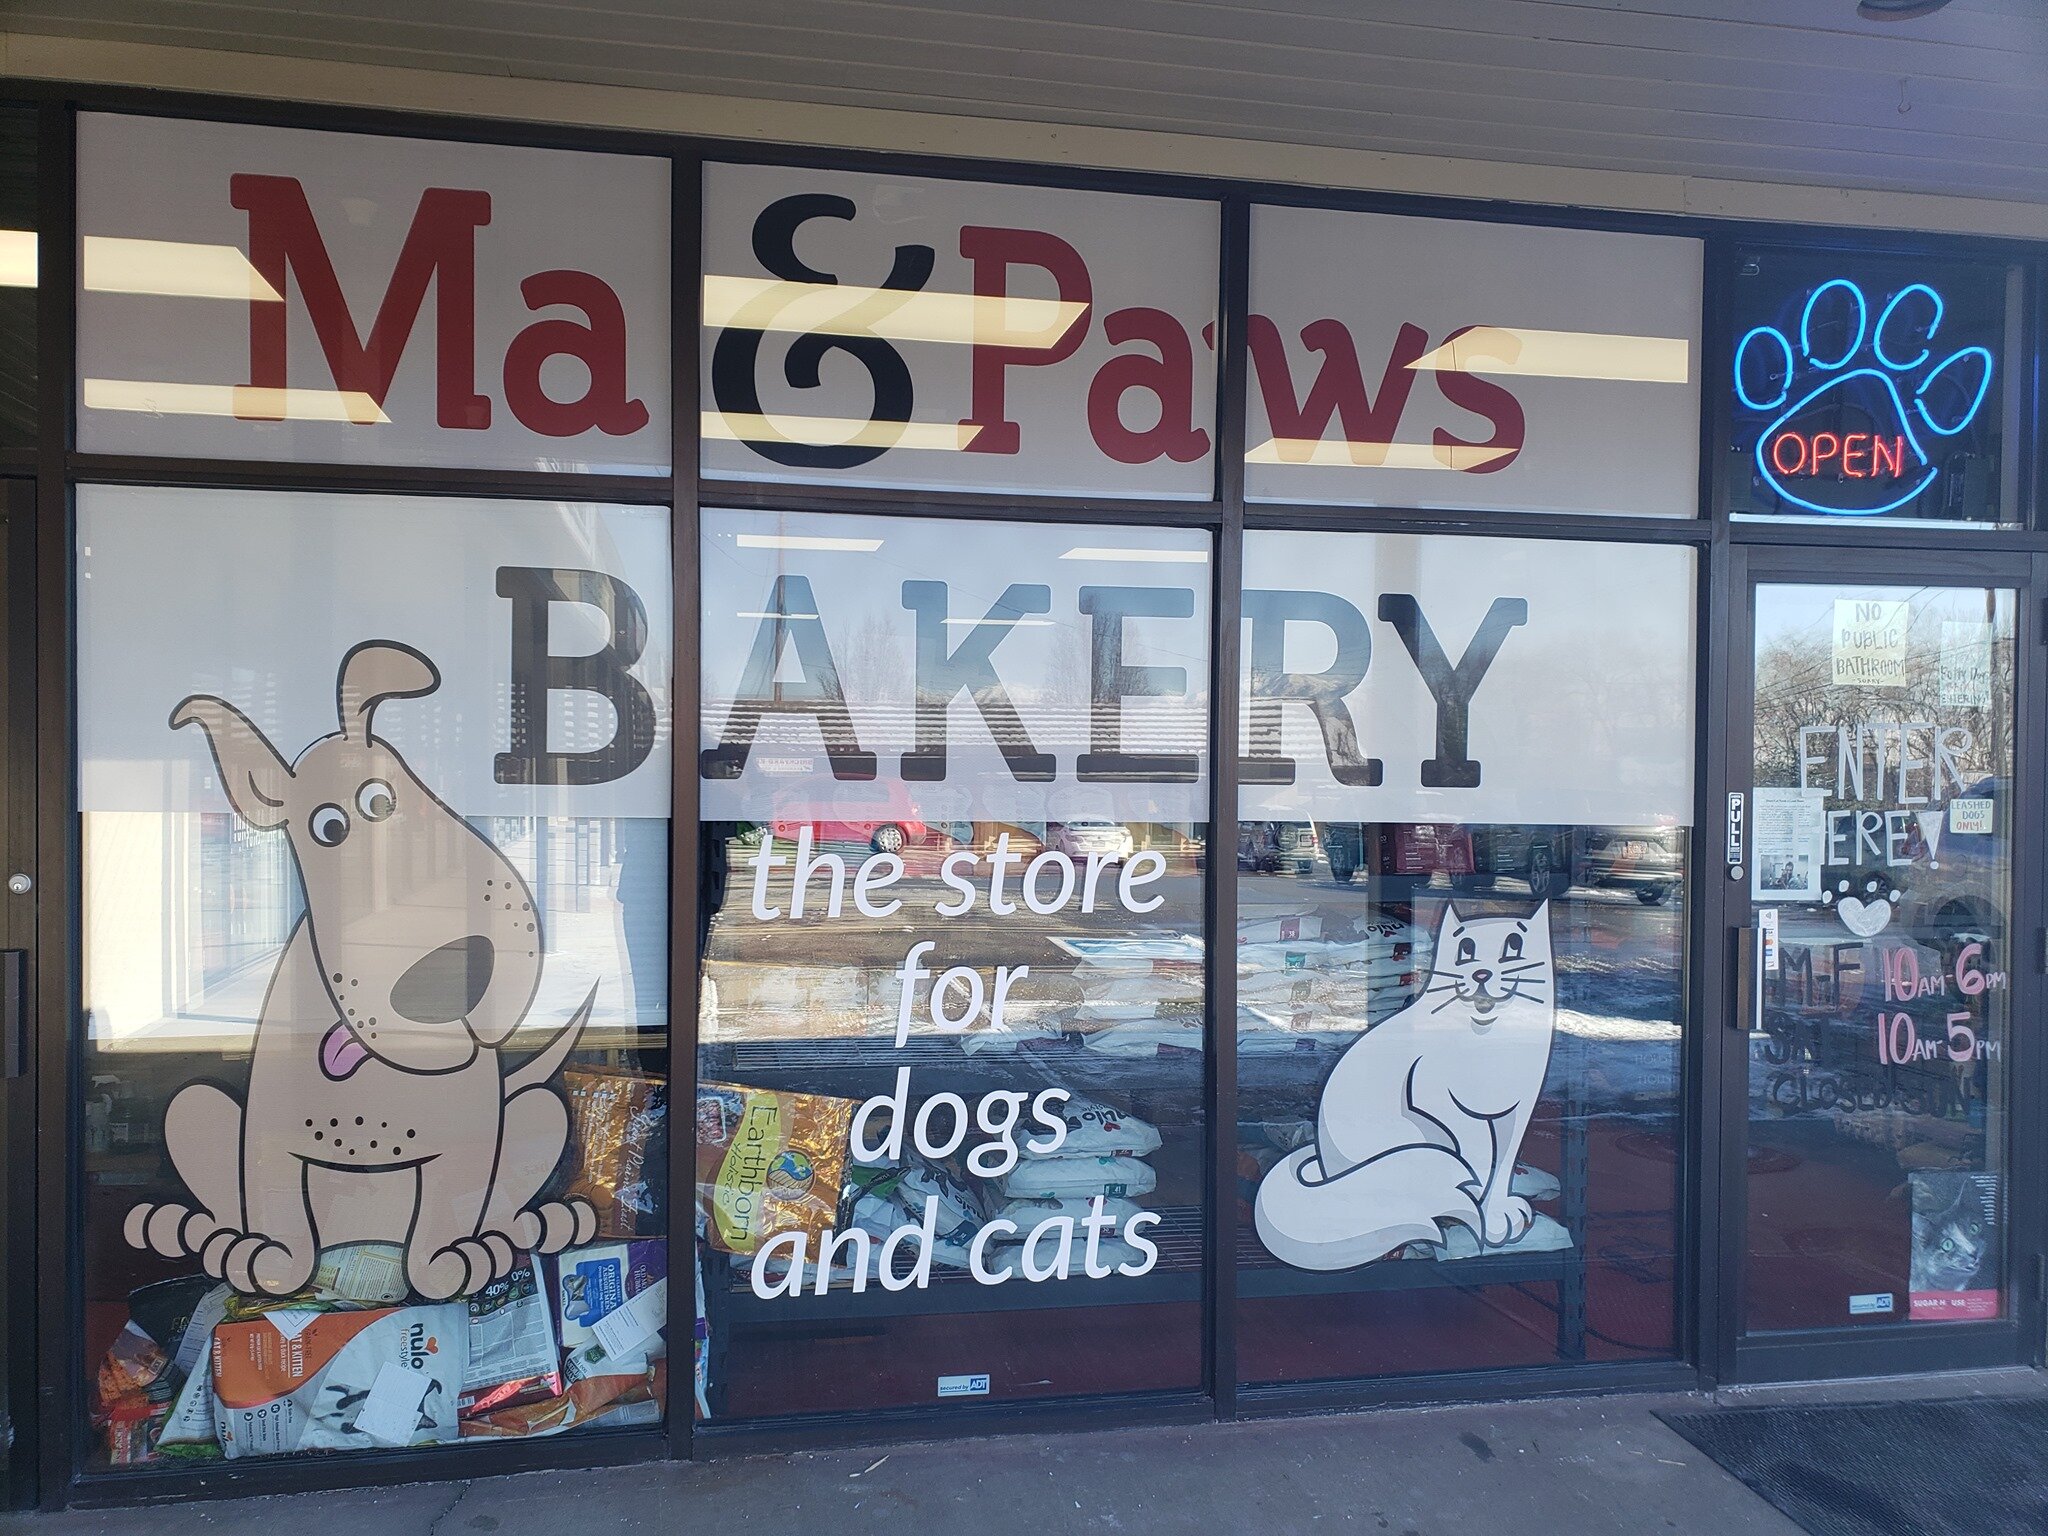 The glass storefront for Ma & Paws Bakery includes a large name sign and cartoon painting of both a dog and a cat